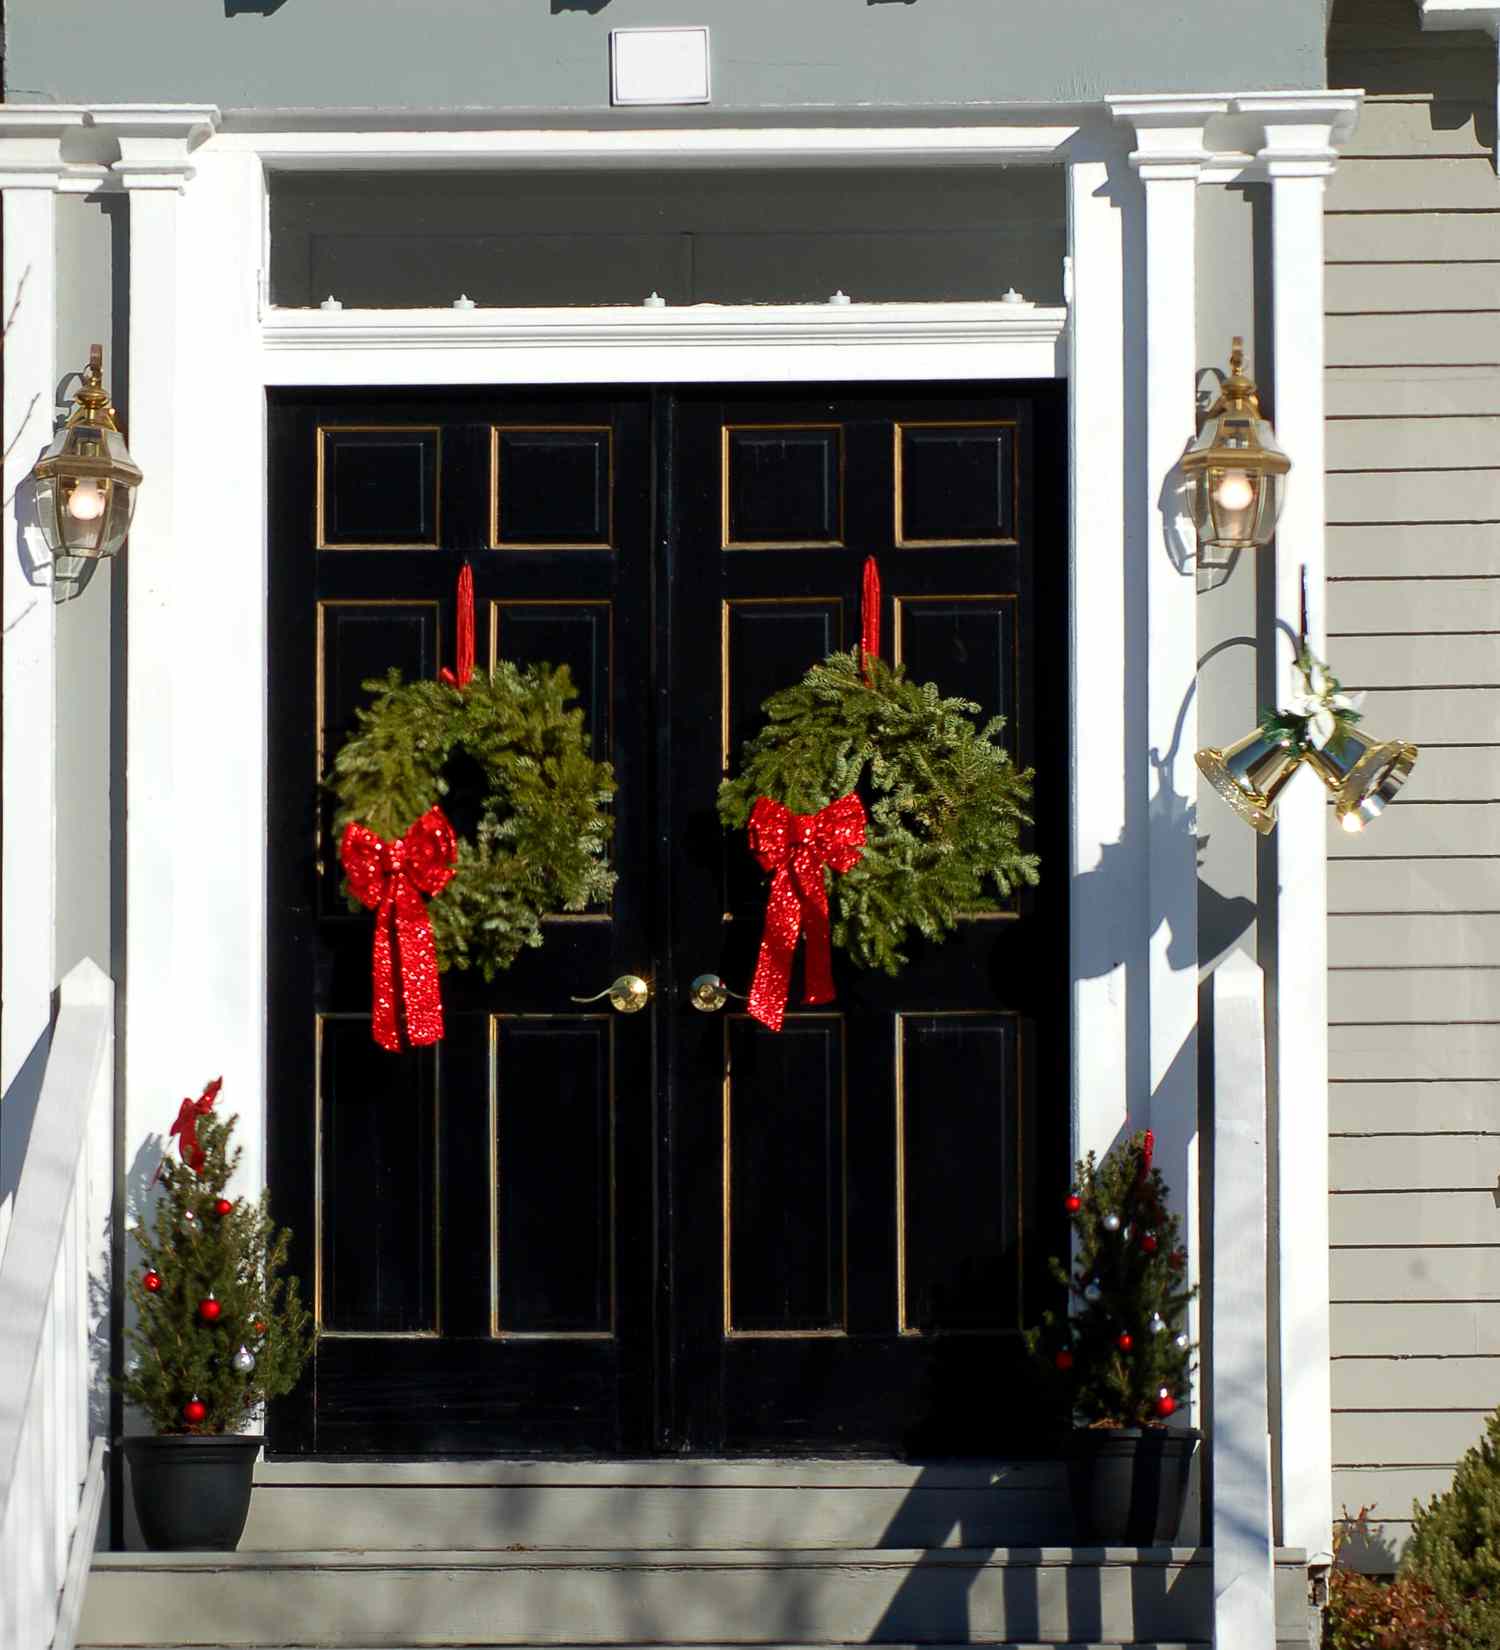 Picture : home with double doors has a Christmas wreath on each. It's simple holiday decor.